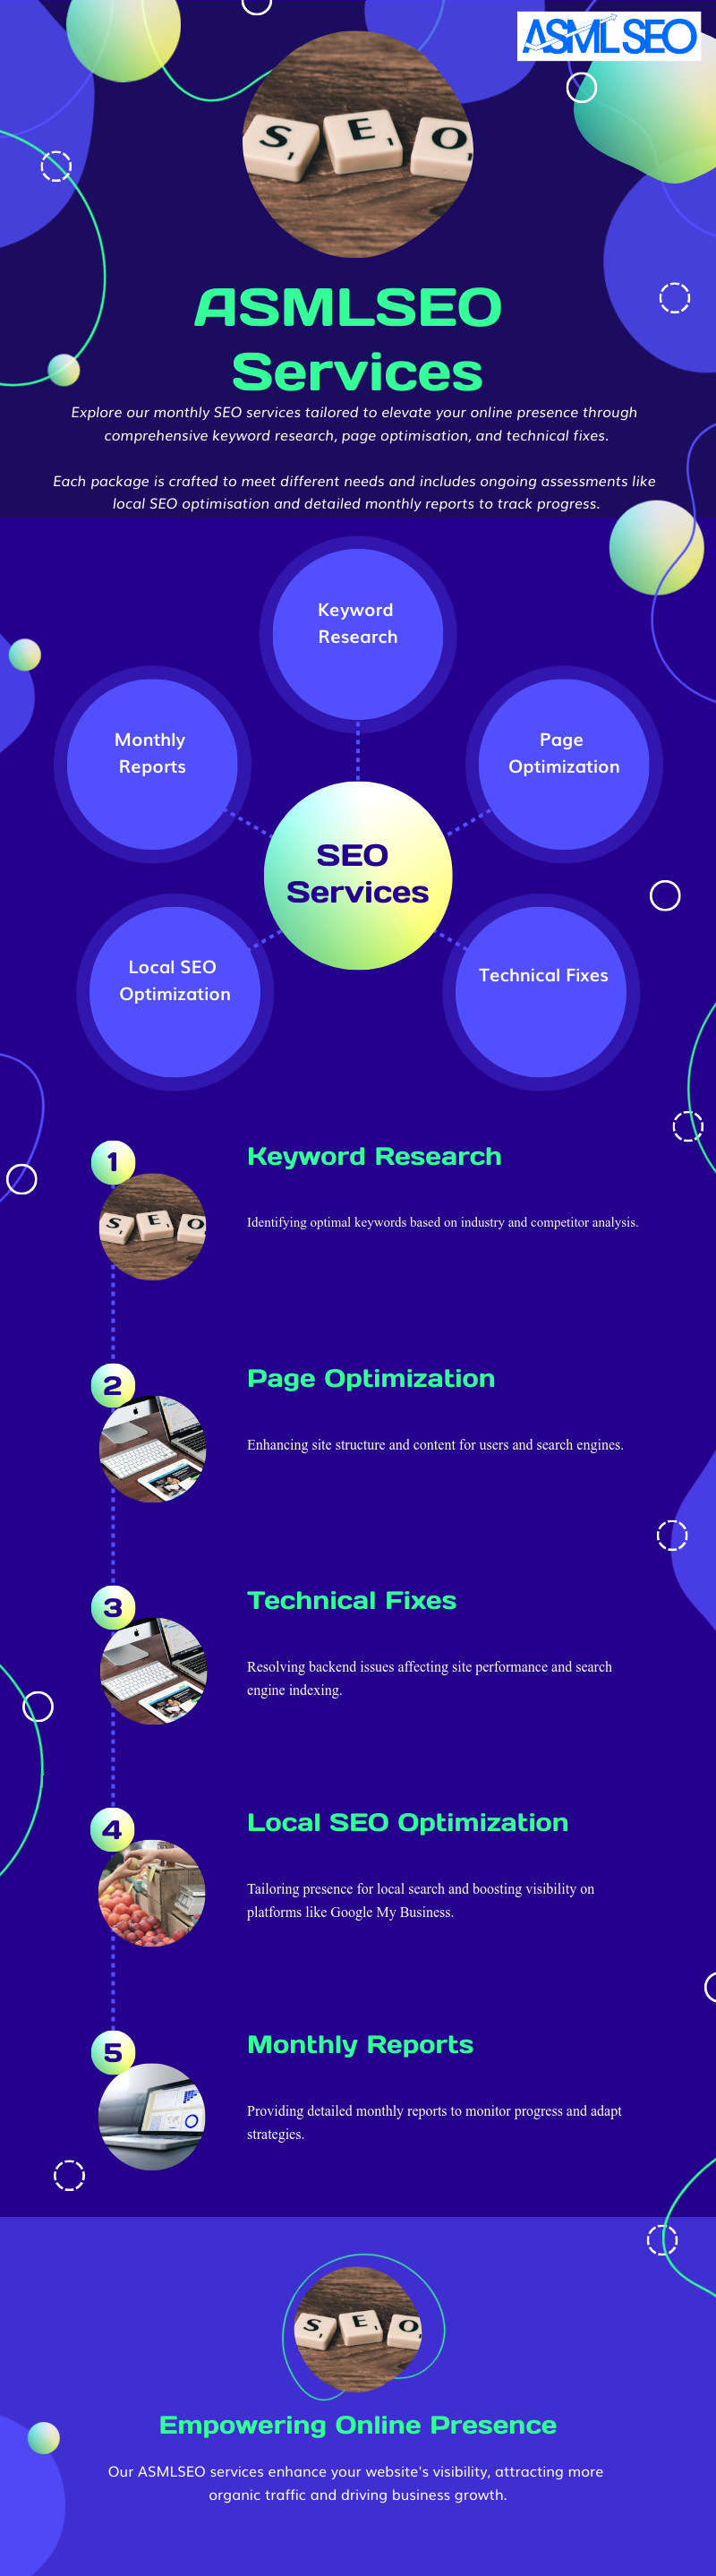 Infographic by ASMLSEO detailing various SEO services including Keyword Research, Page Optimization, Technical Fixes, Local SEO Optimization, and Monthly Reports, all part of ASMLSEO's comprehensive pricing SEO strategies enhanced with ChatGPT AI insights.